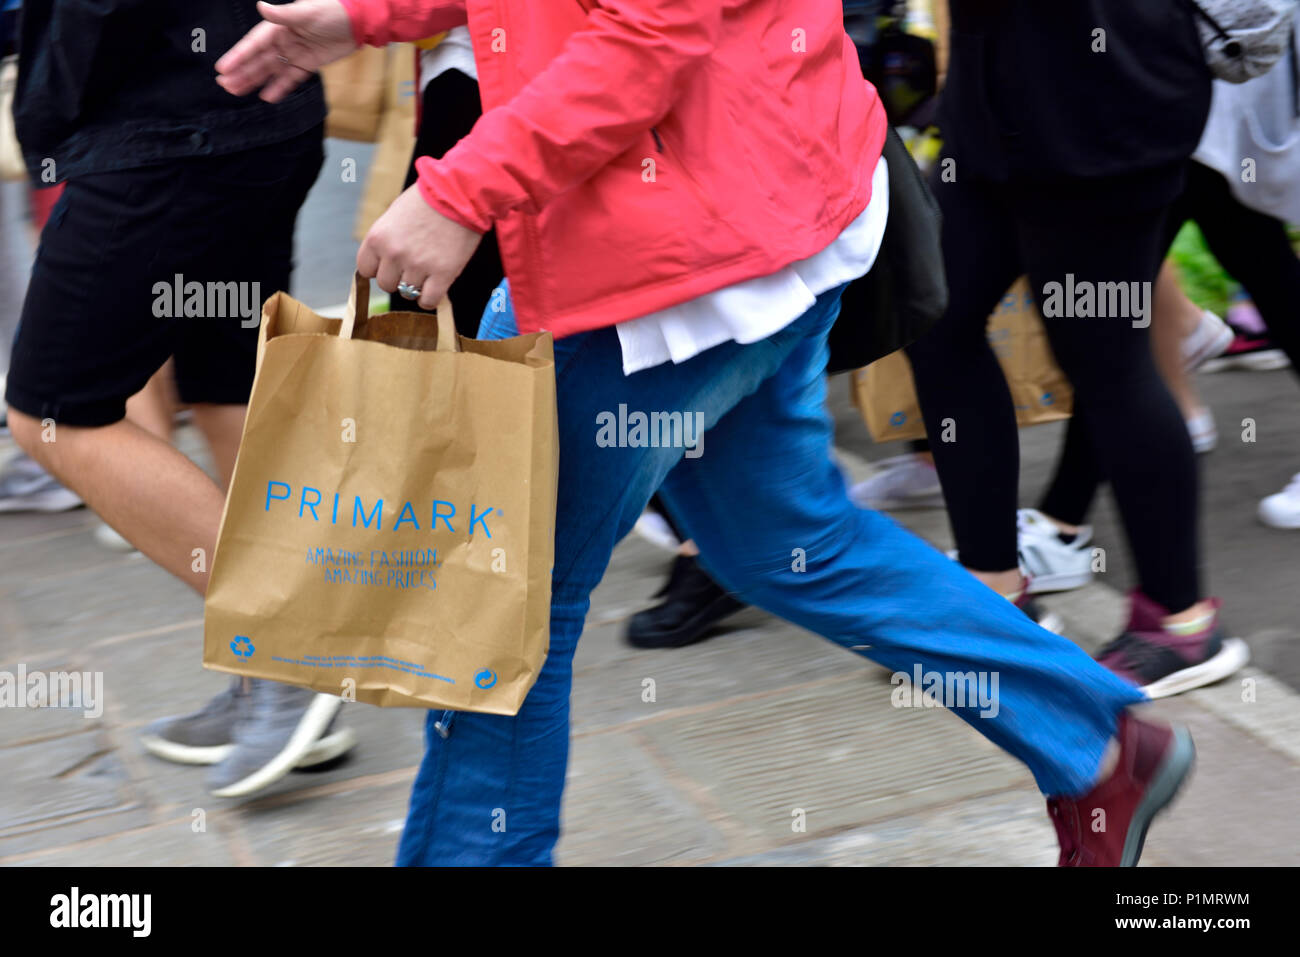 Shopper in a hurry carrying a paper Primark carrier bag Stock Photo